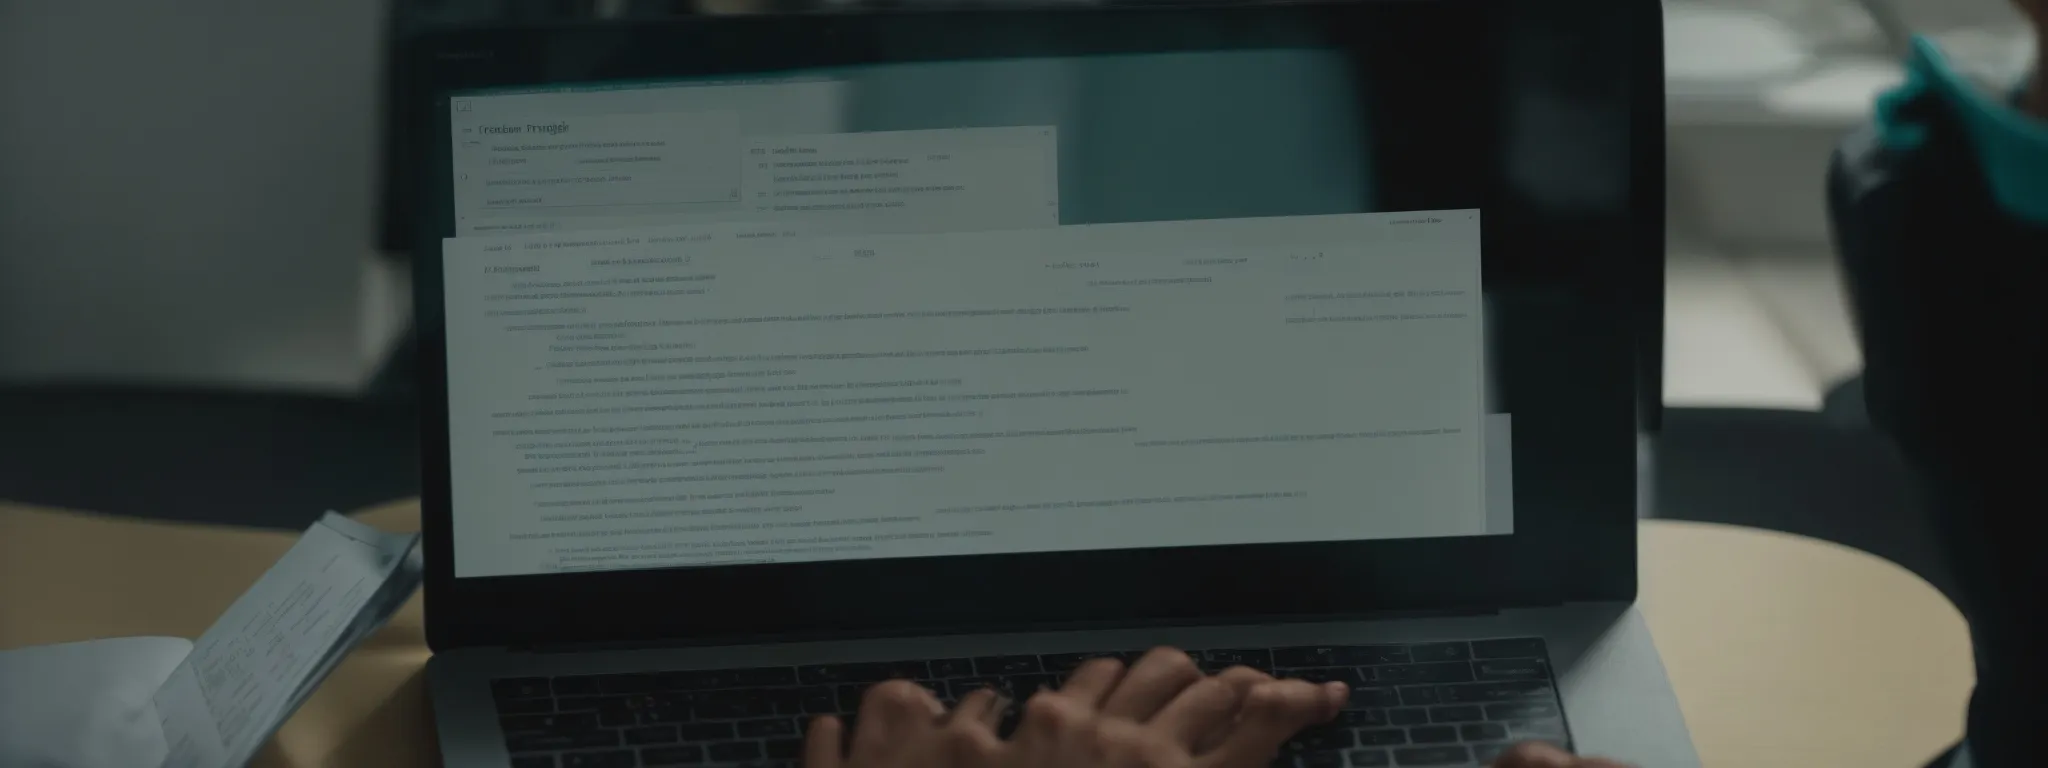 a focused individual typing on a laptop with an abstract overlay of magnifying glasses highlighting text snippets.